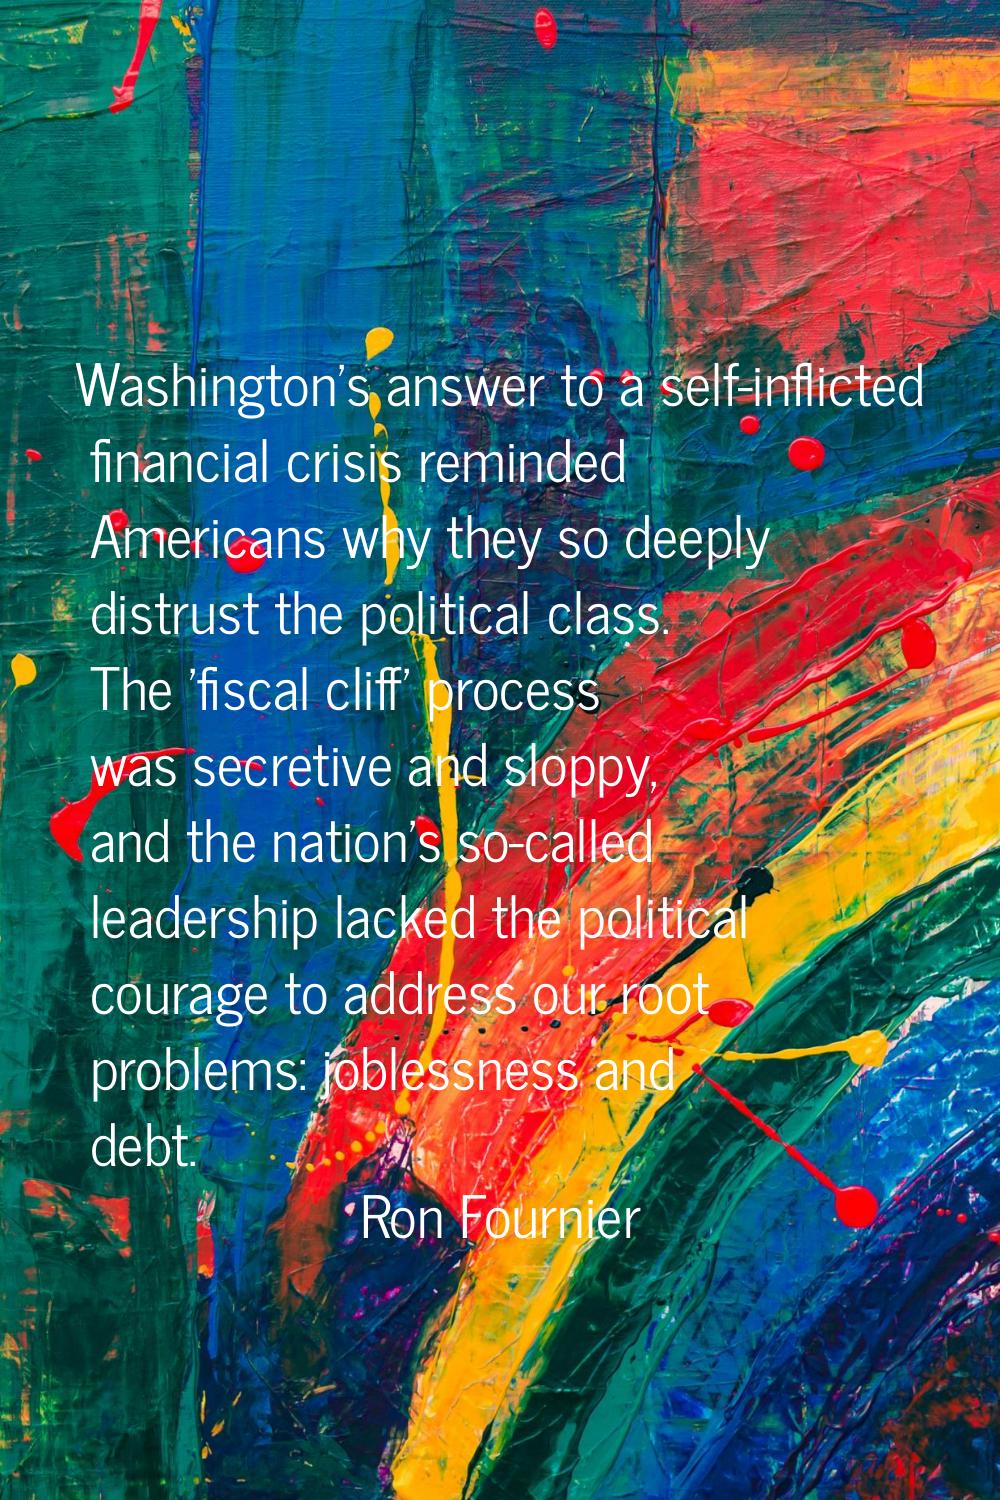 Washington's answer to a self-inflicted financial crisis reminded Americans why they so deeply dist